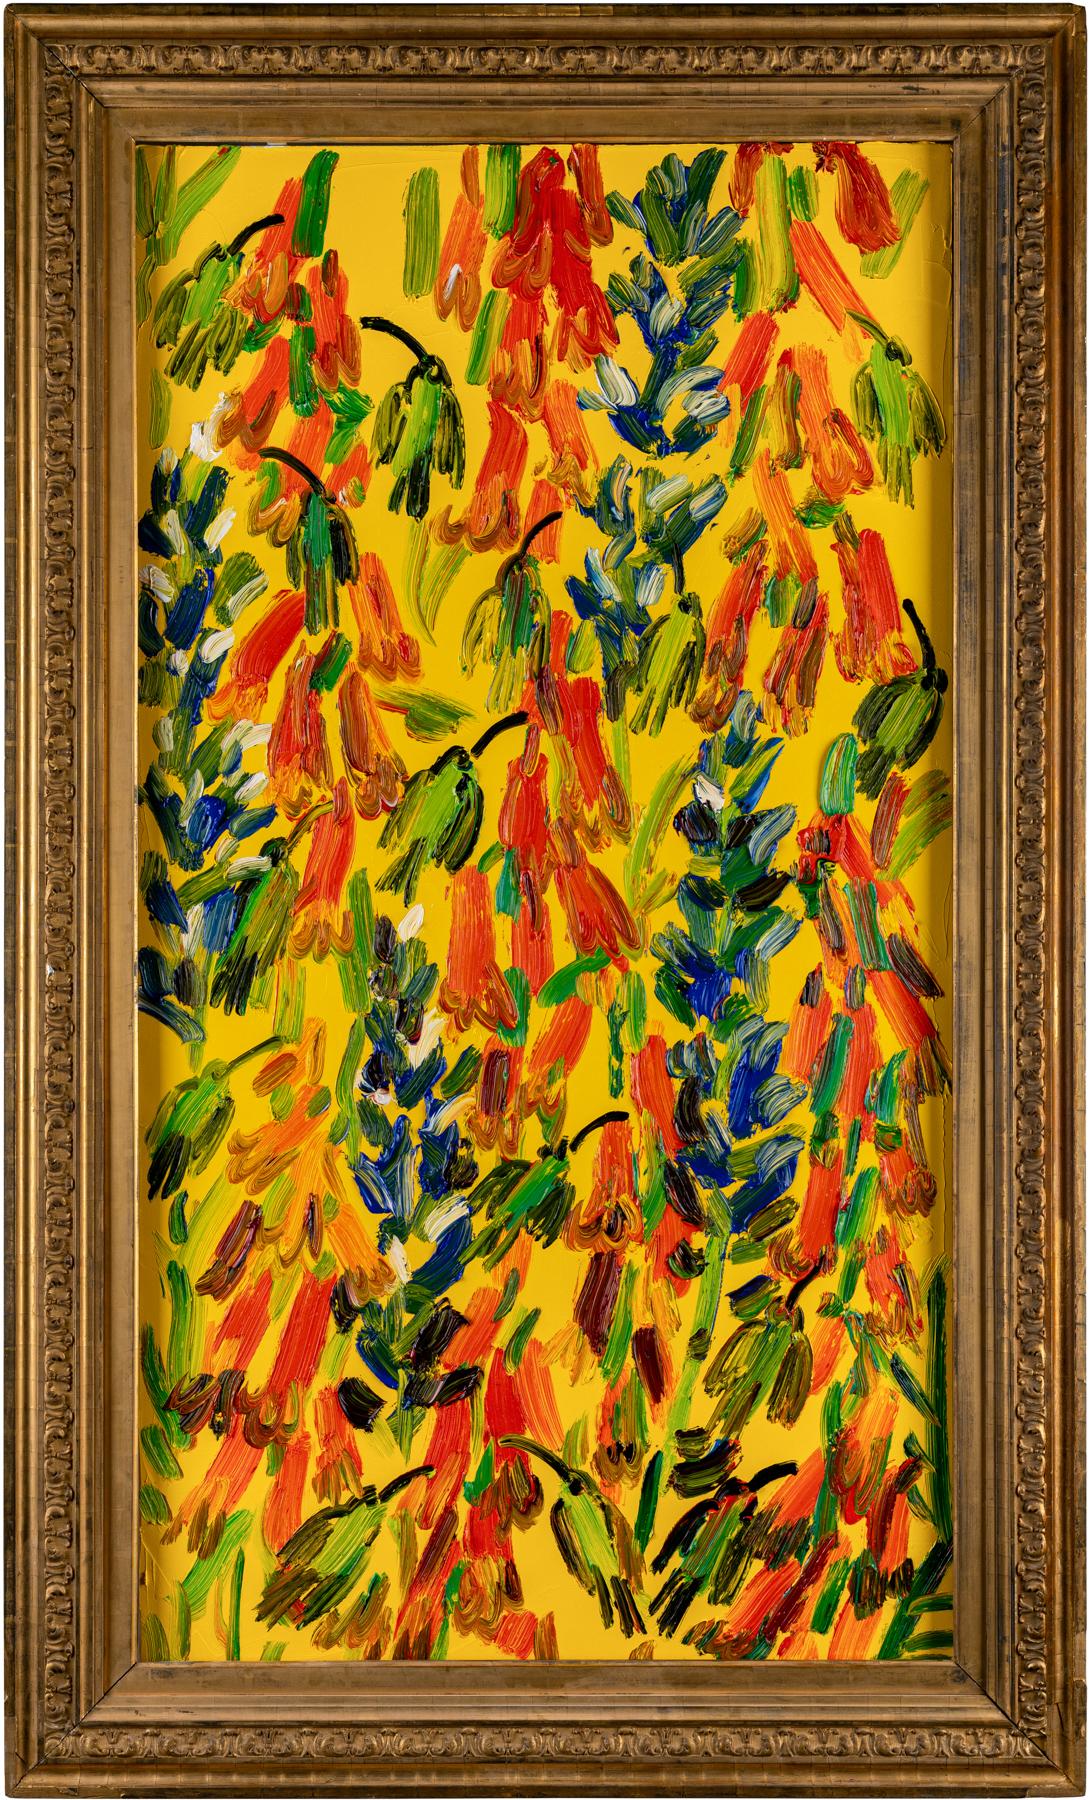 Hunt Slonem "Hummingbirds Lupin" on Yellow
Green hummingbirds with flowers on a yellow background in an antiqued wood and gold frame.

Unframed: 48 x 26 inches
Framed: 56 x 33 inches
*Painting is framed - Please note Hunt Slonem paintings with